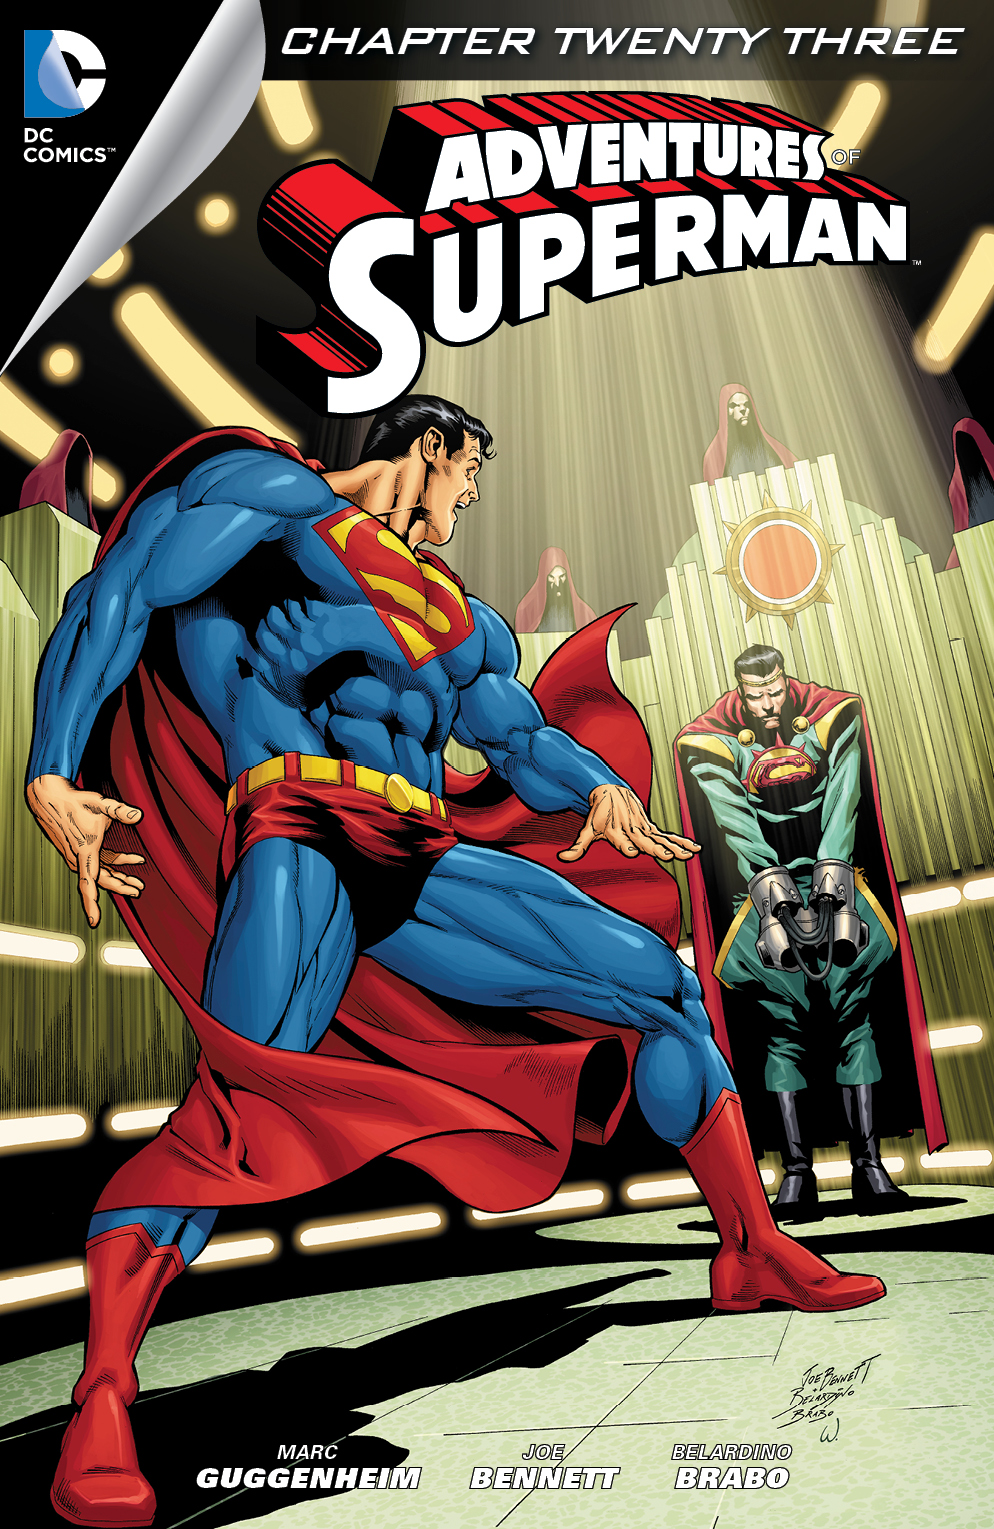 Adventures of Superman (2013-) #23 preview images